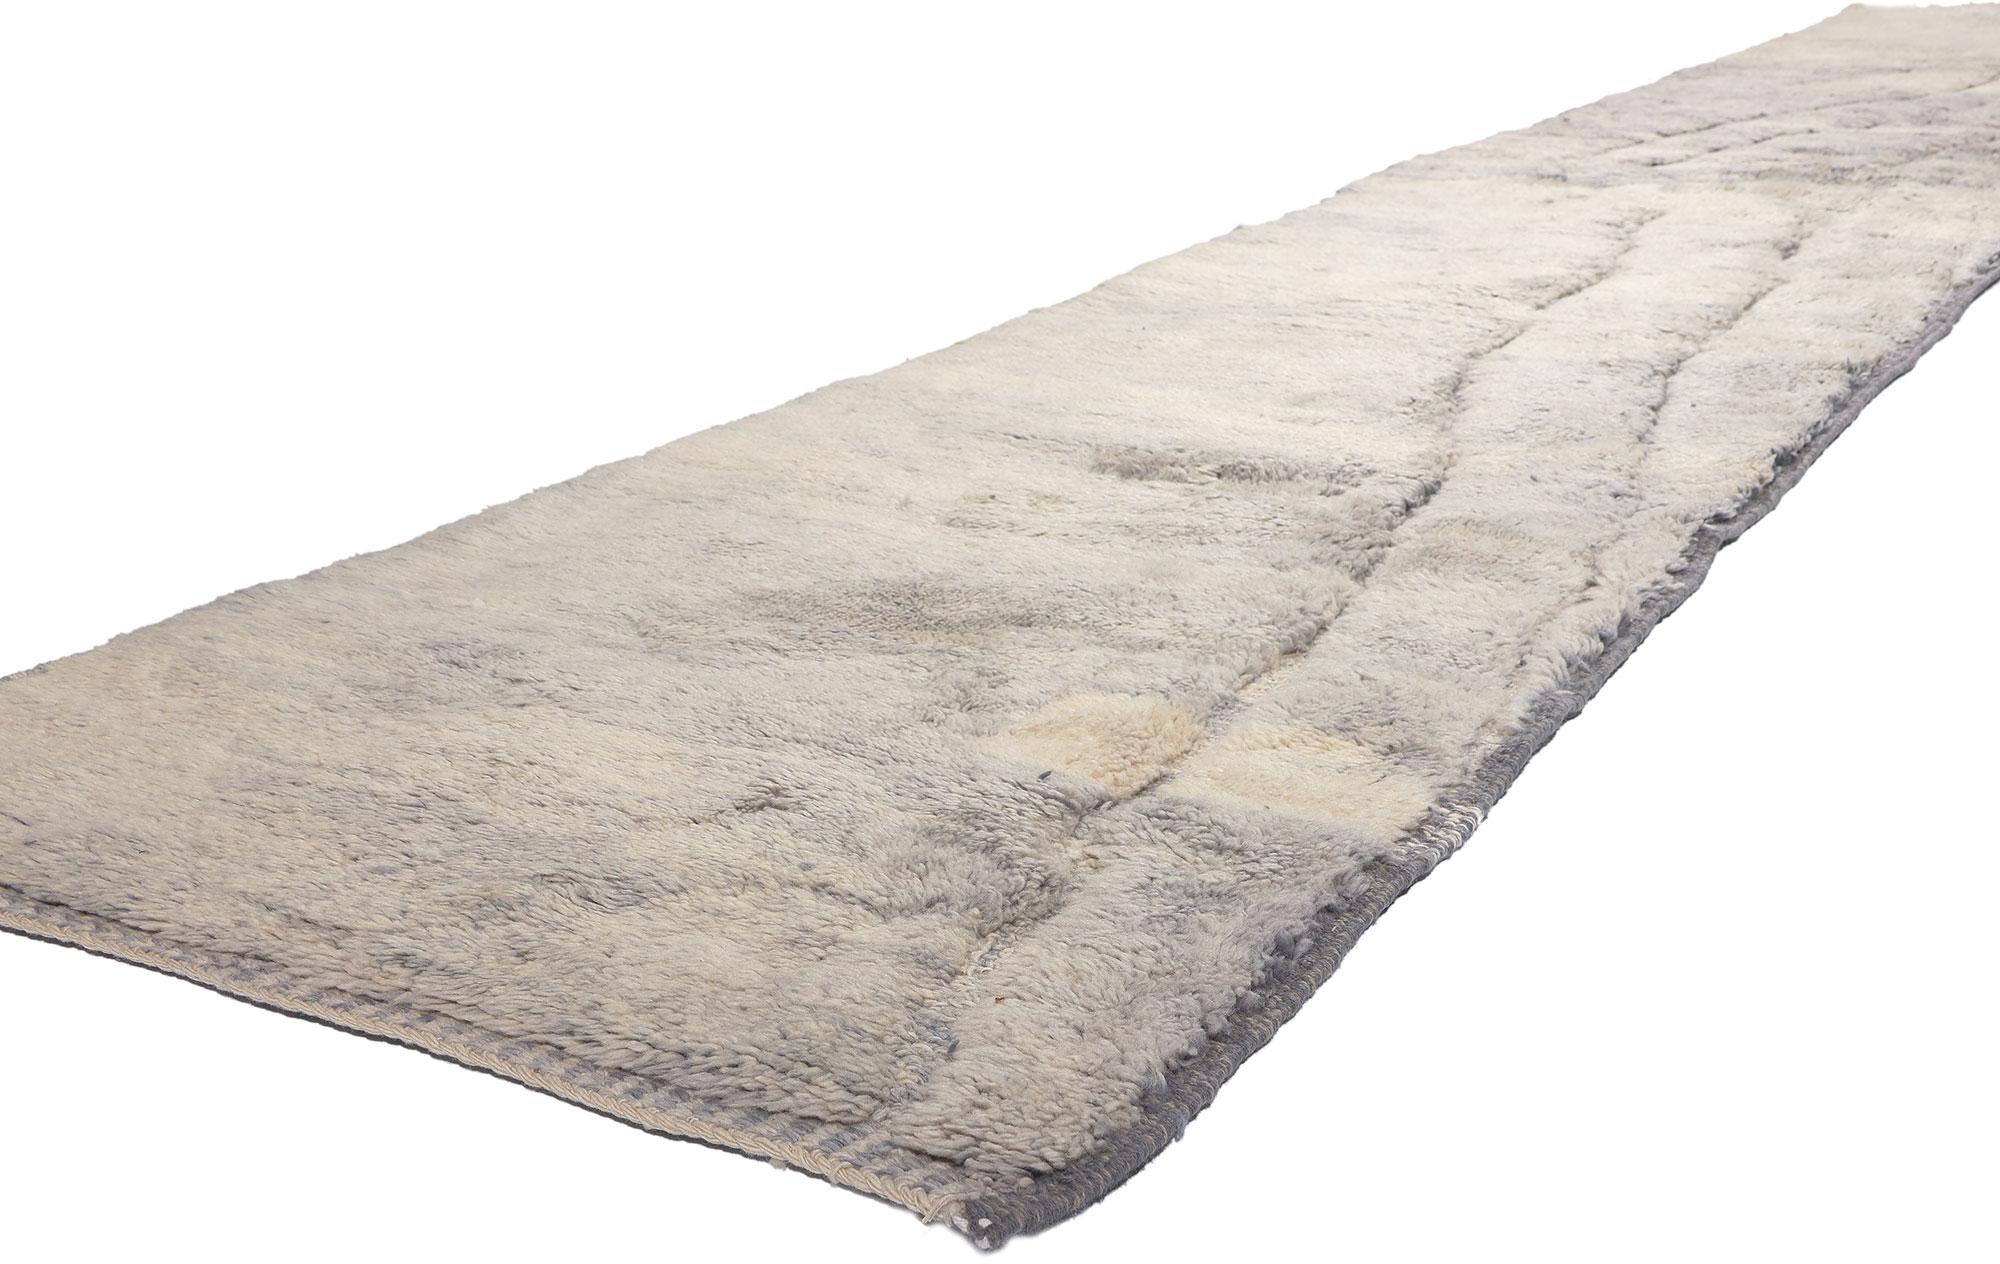 78685 Extra-Long Modern Lavender-Gray Moroccan Rug Runner, 03'02 x 18'04. Introducing our exquisite hand-knotted wool Moroccan rug runner, a perfect blend of modern style and contemporary elegance. Crafted with meticulous attention to detail, this